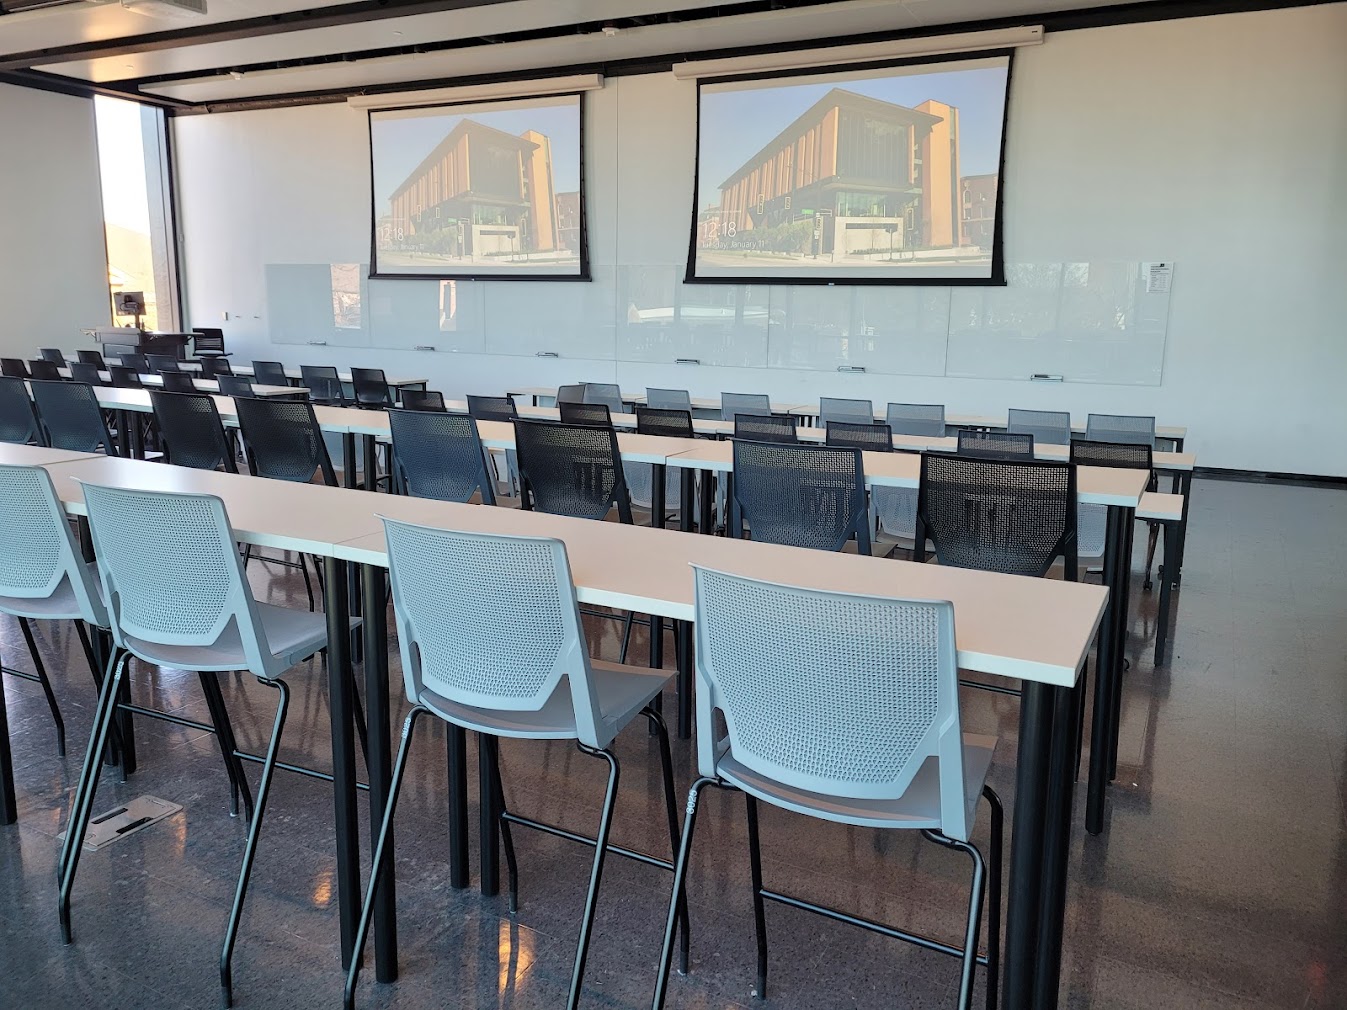 This is a view of the room with student desks, projection screens, a front lecture table, and glass boards.